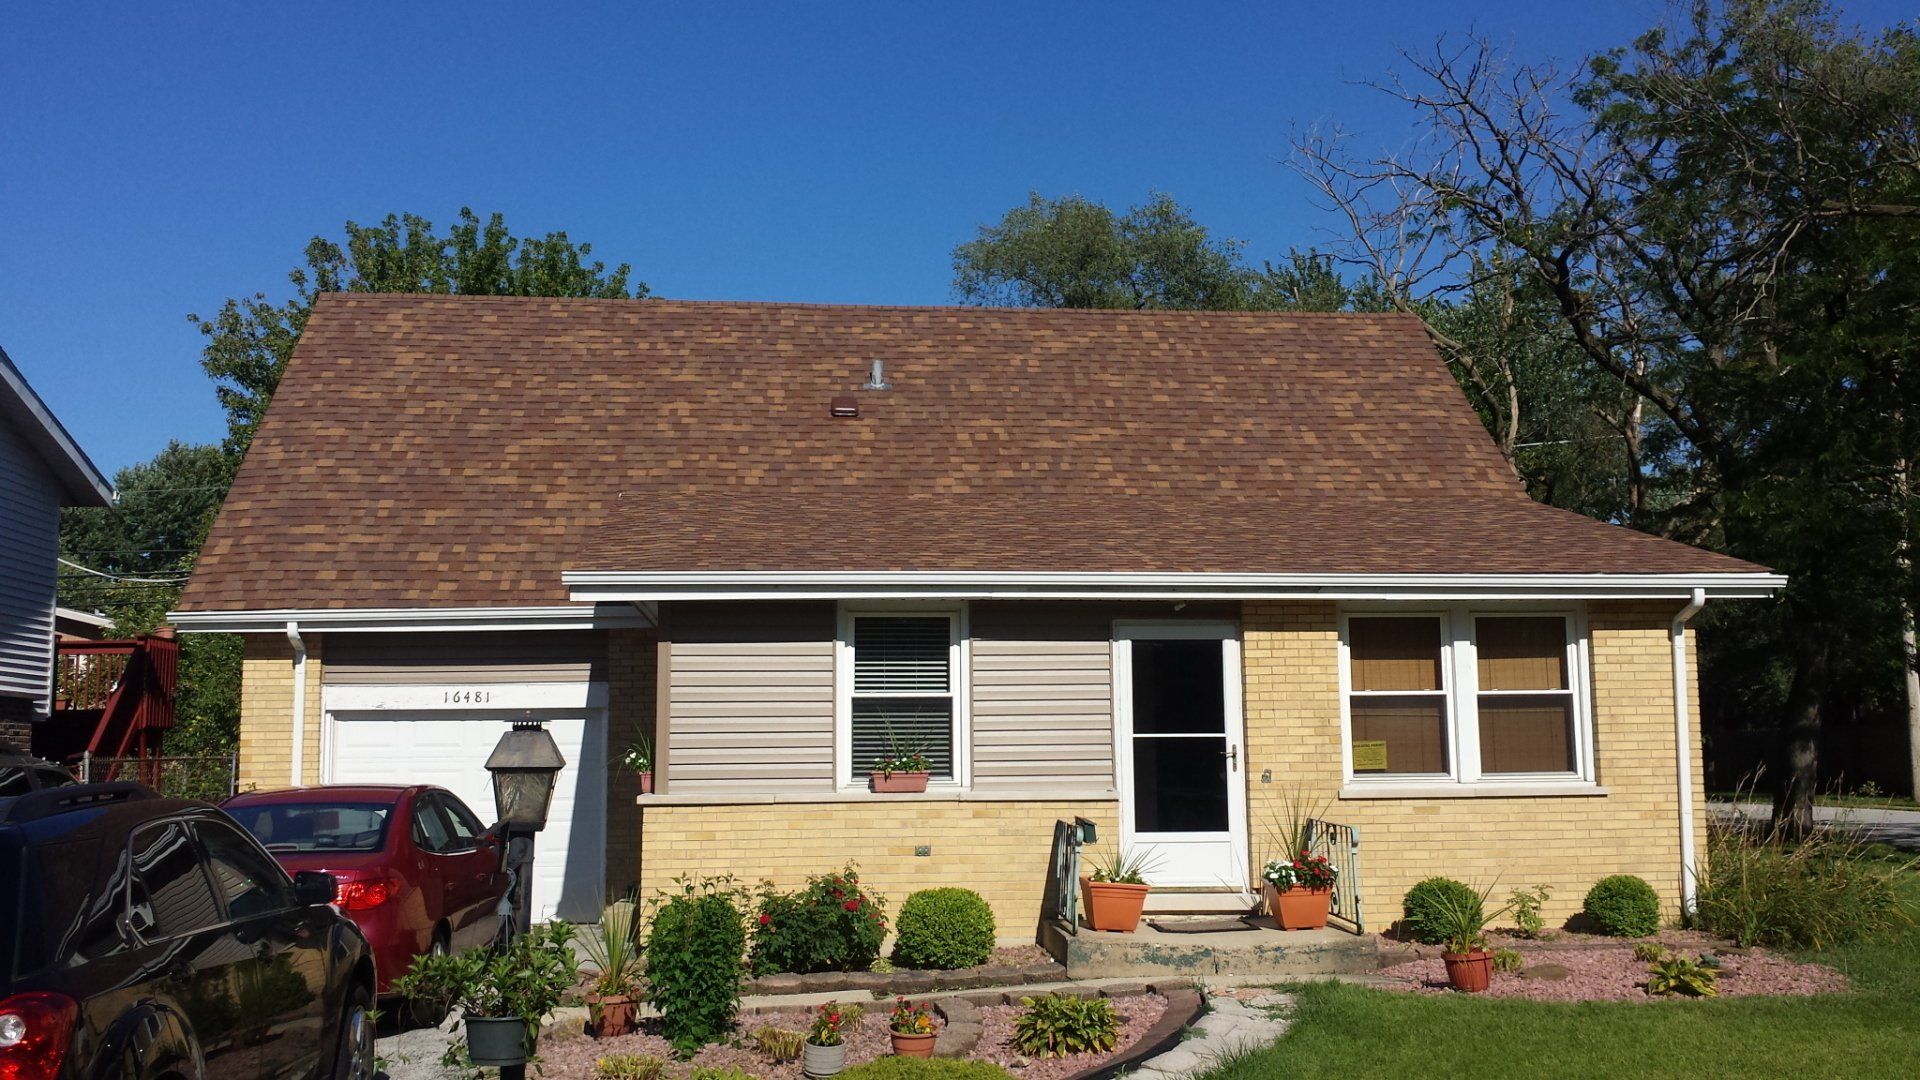 Replaced Roof, Gutters, and Siding in October 2015